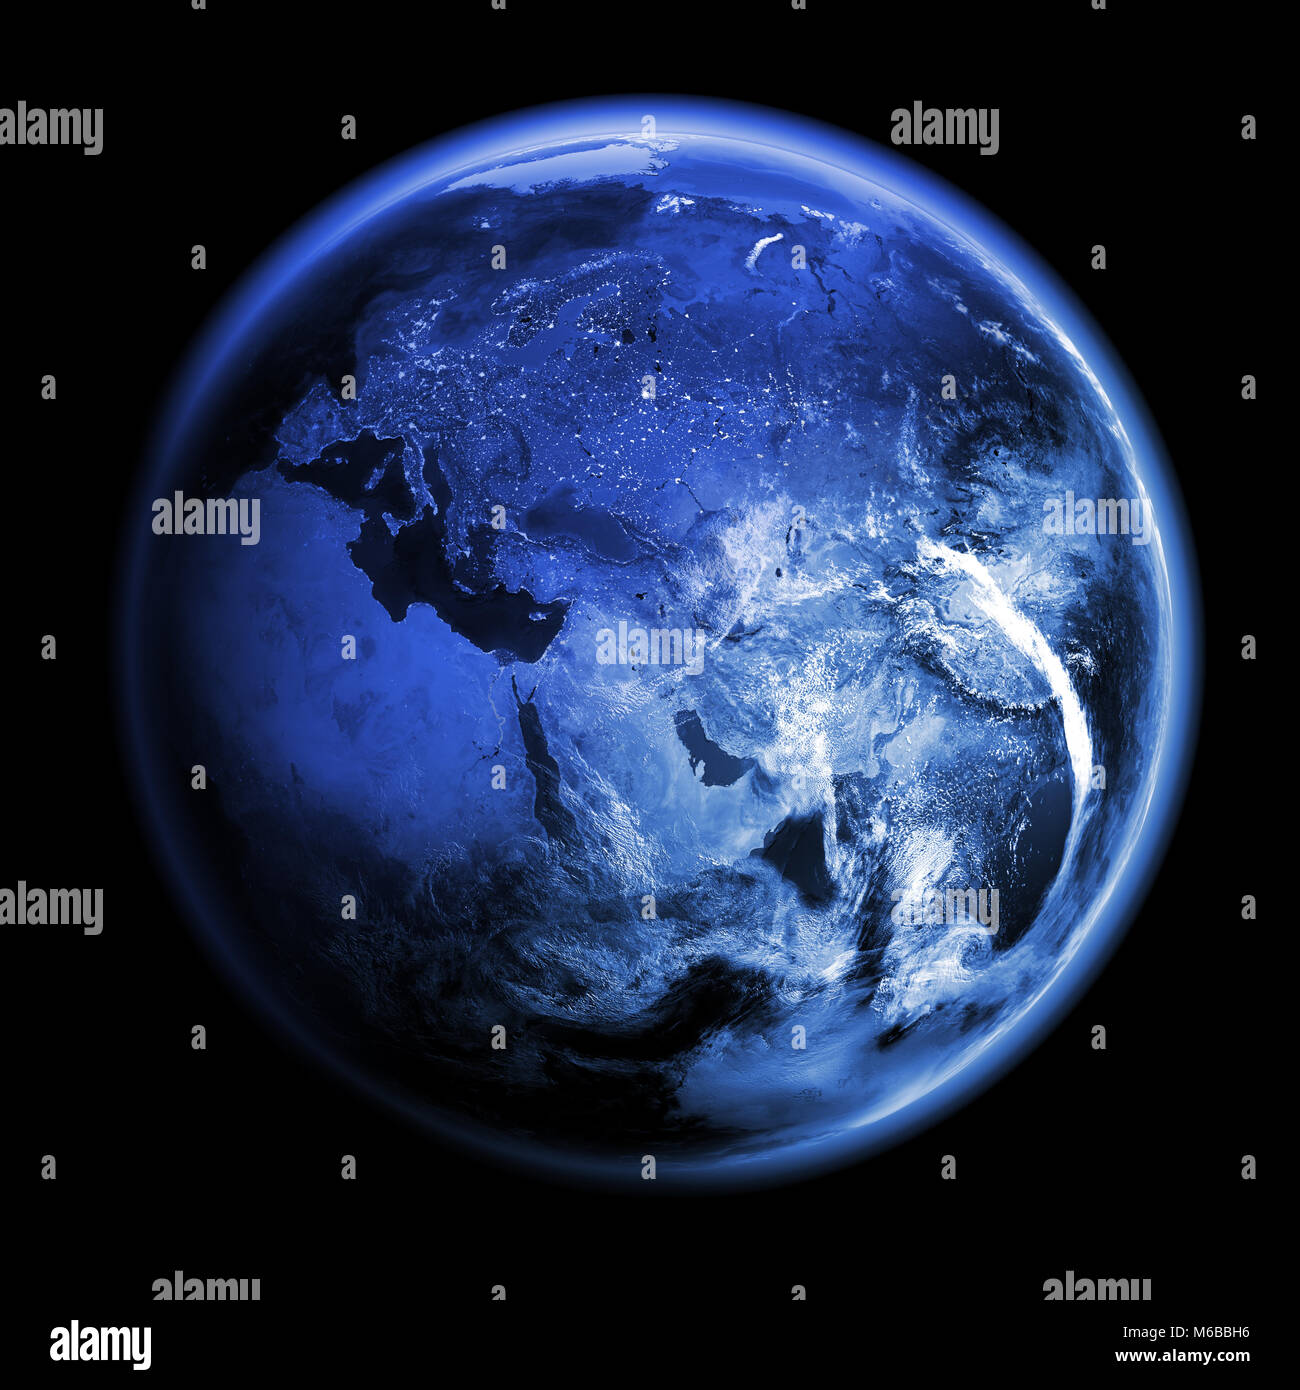 Planet Earth 3d rendering Stock Photo